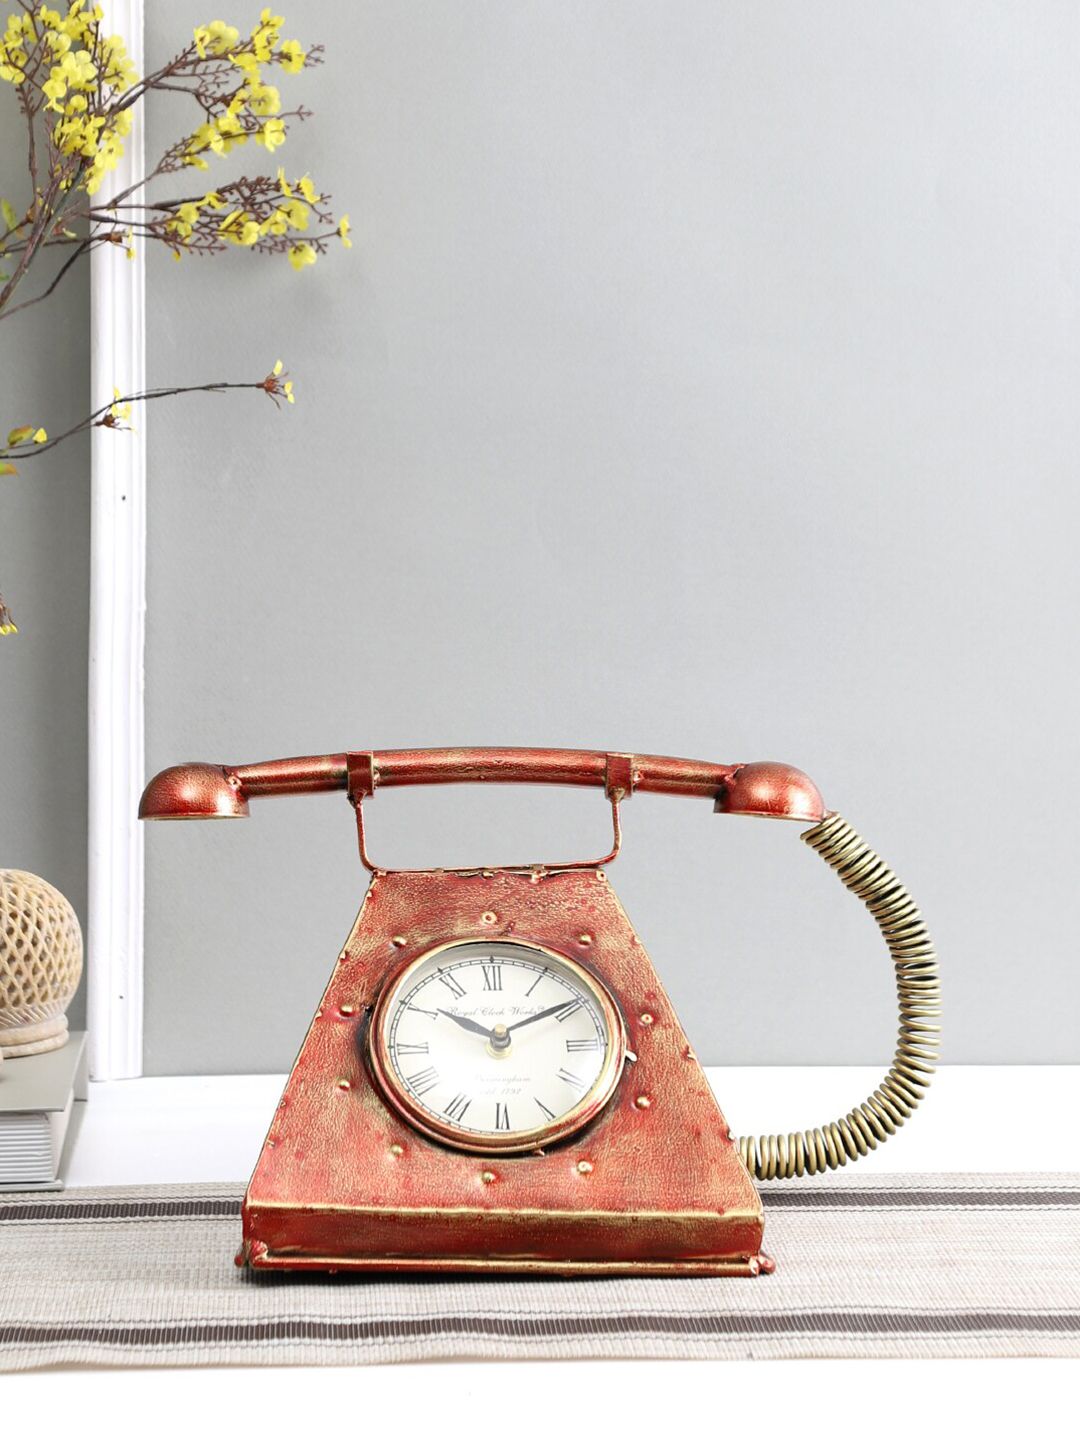 Aapno Rajasthan Rust & Gold-Toned Telephone Shaped 19 CM Traditional Analogue Table Clock Price in India